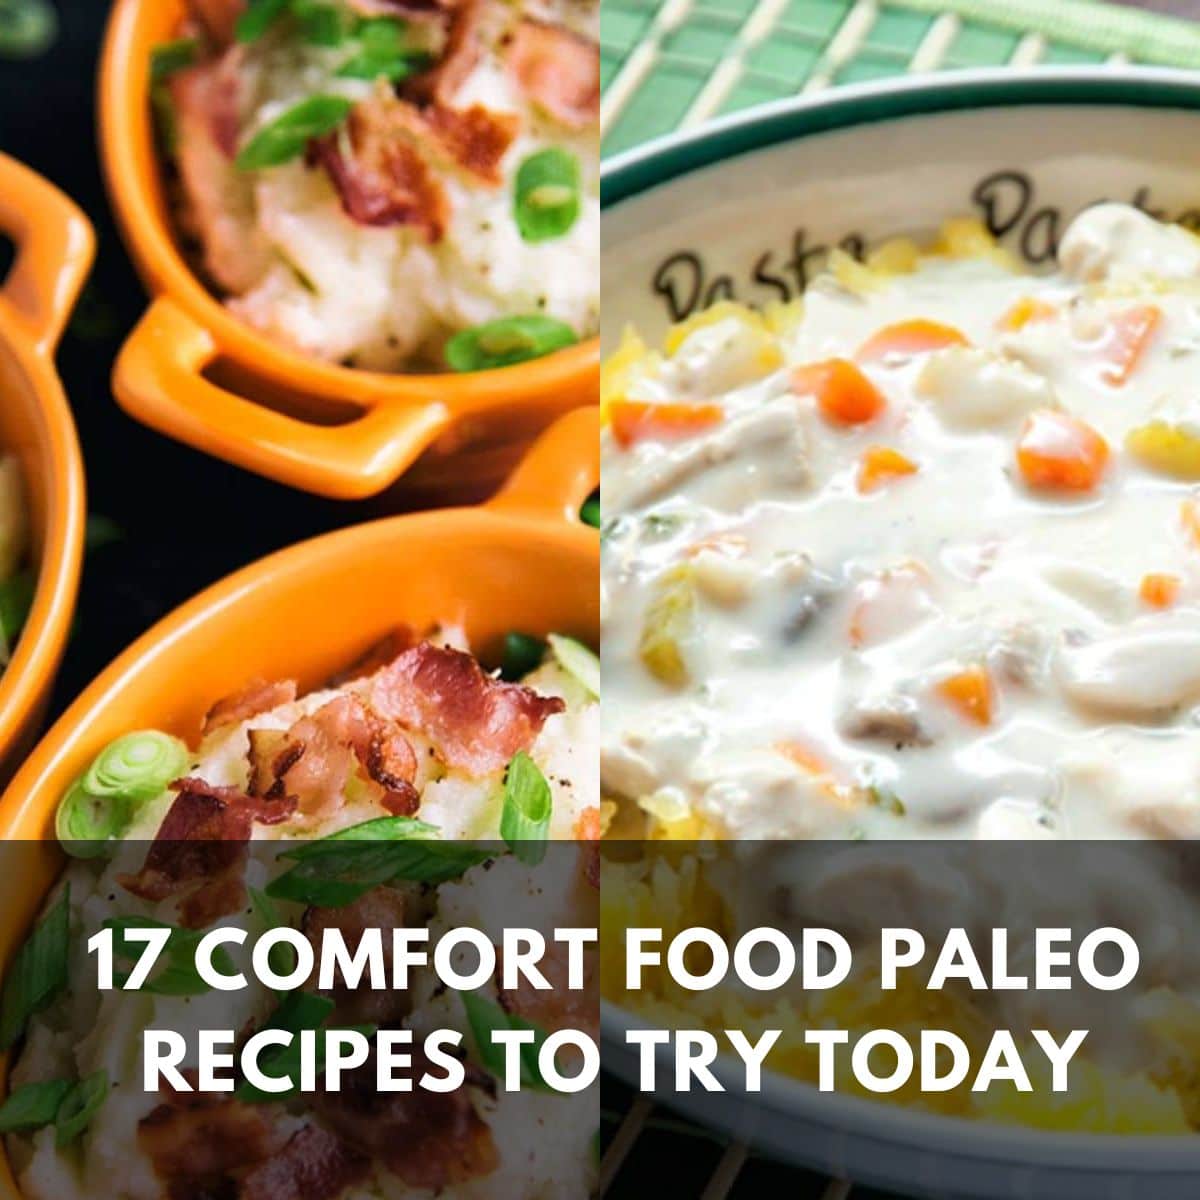 17 Comfort Food Paleo Recipes To Try Today